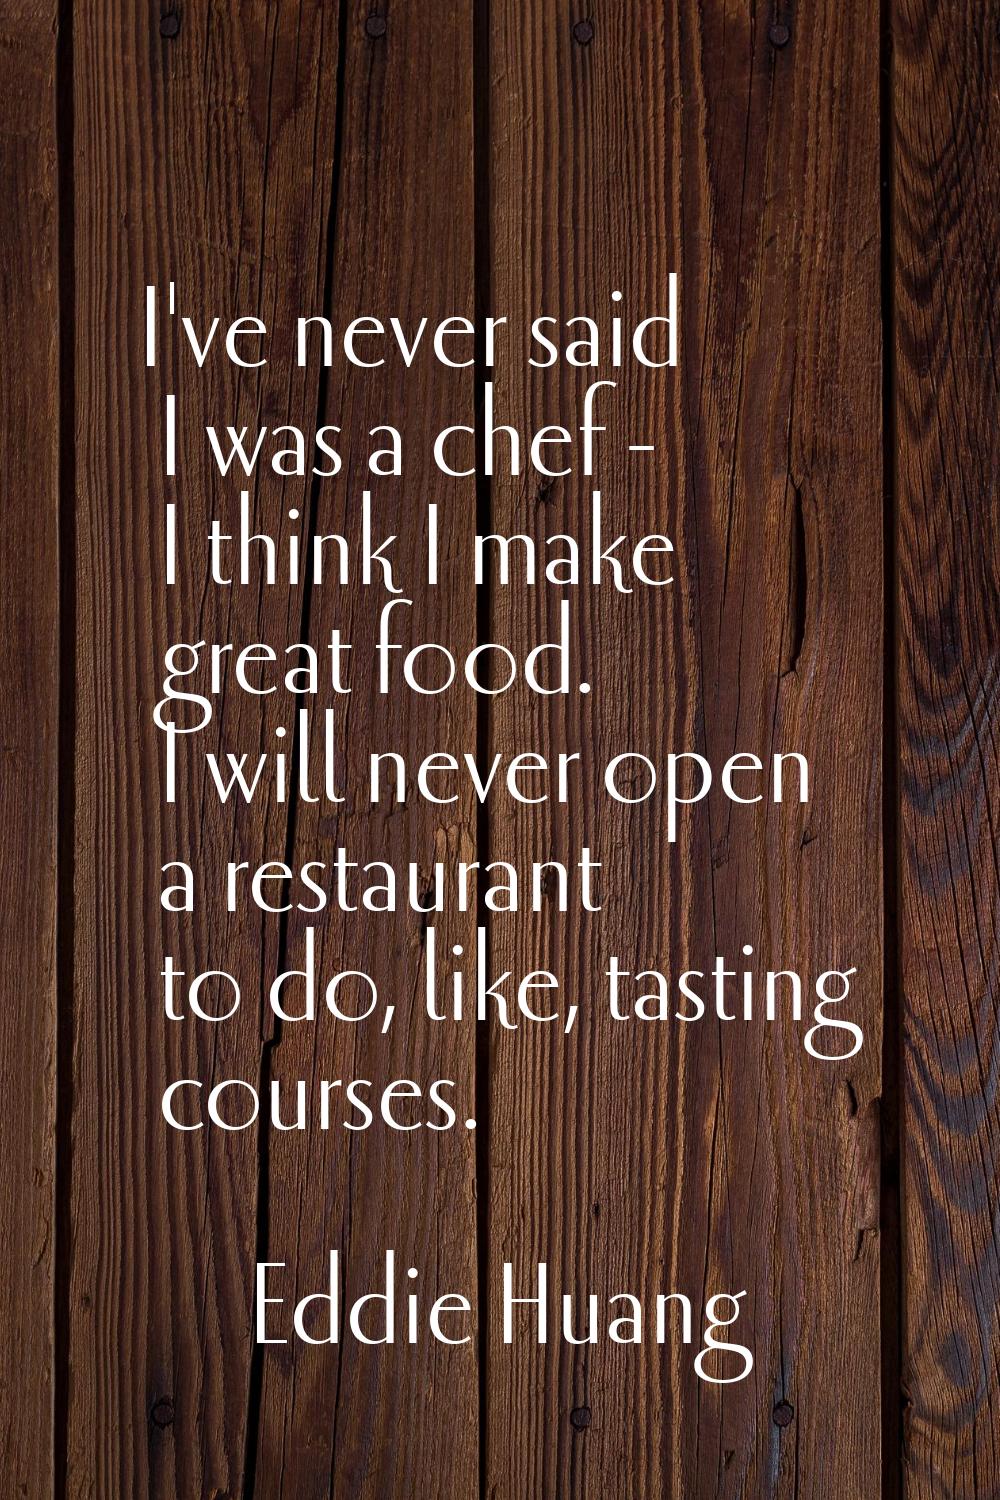 I've never said I was a chef - I think I make great food. I will never open a restaurant to do, lik